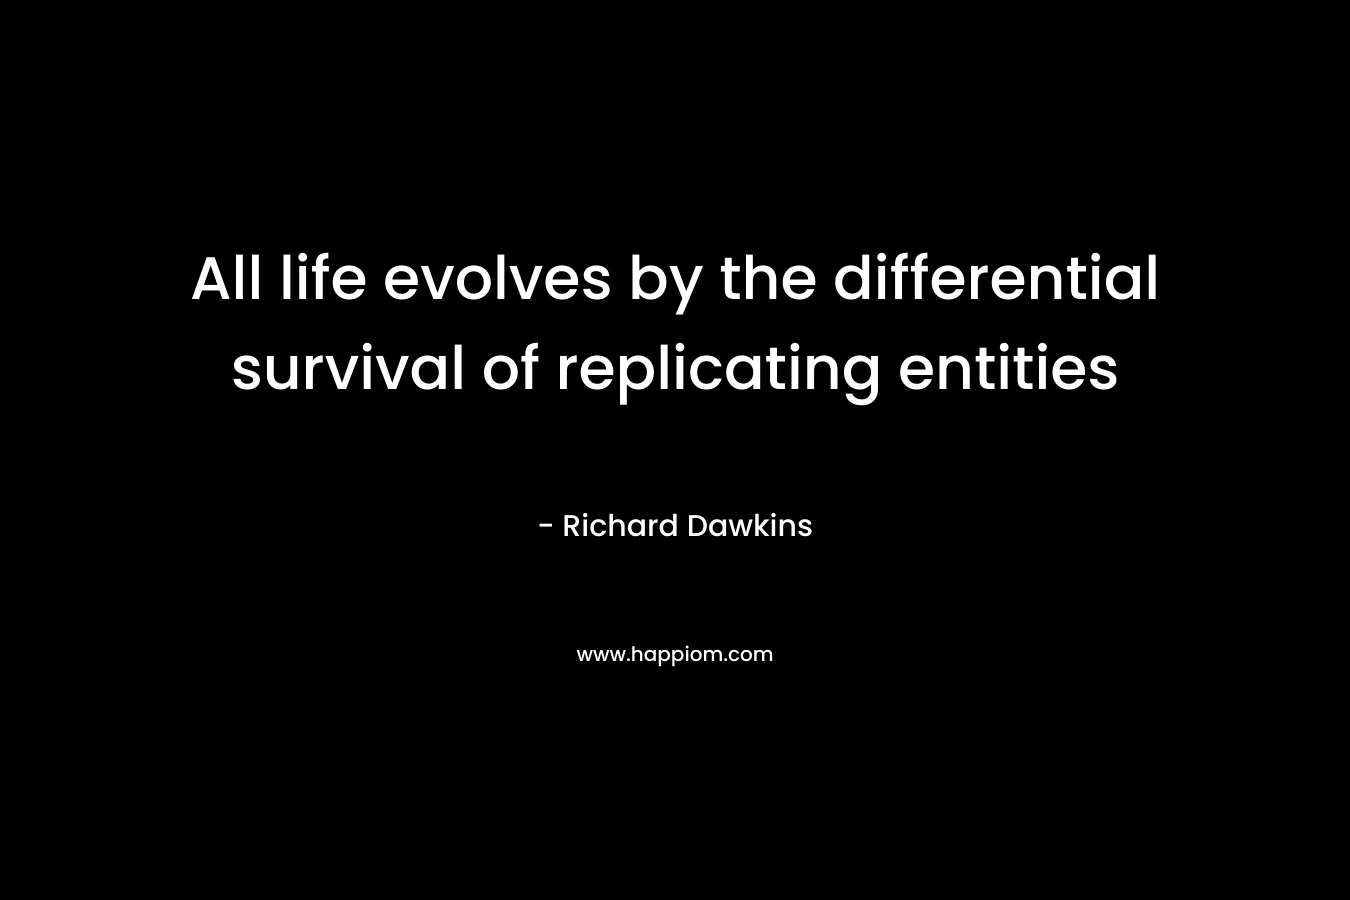 All life evolves by the differential survival of replicating entities